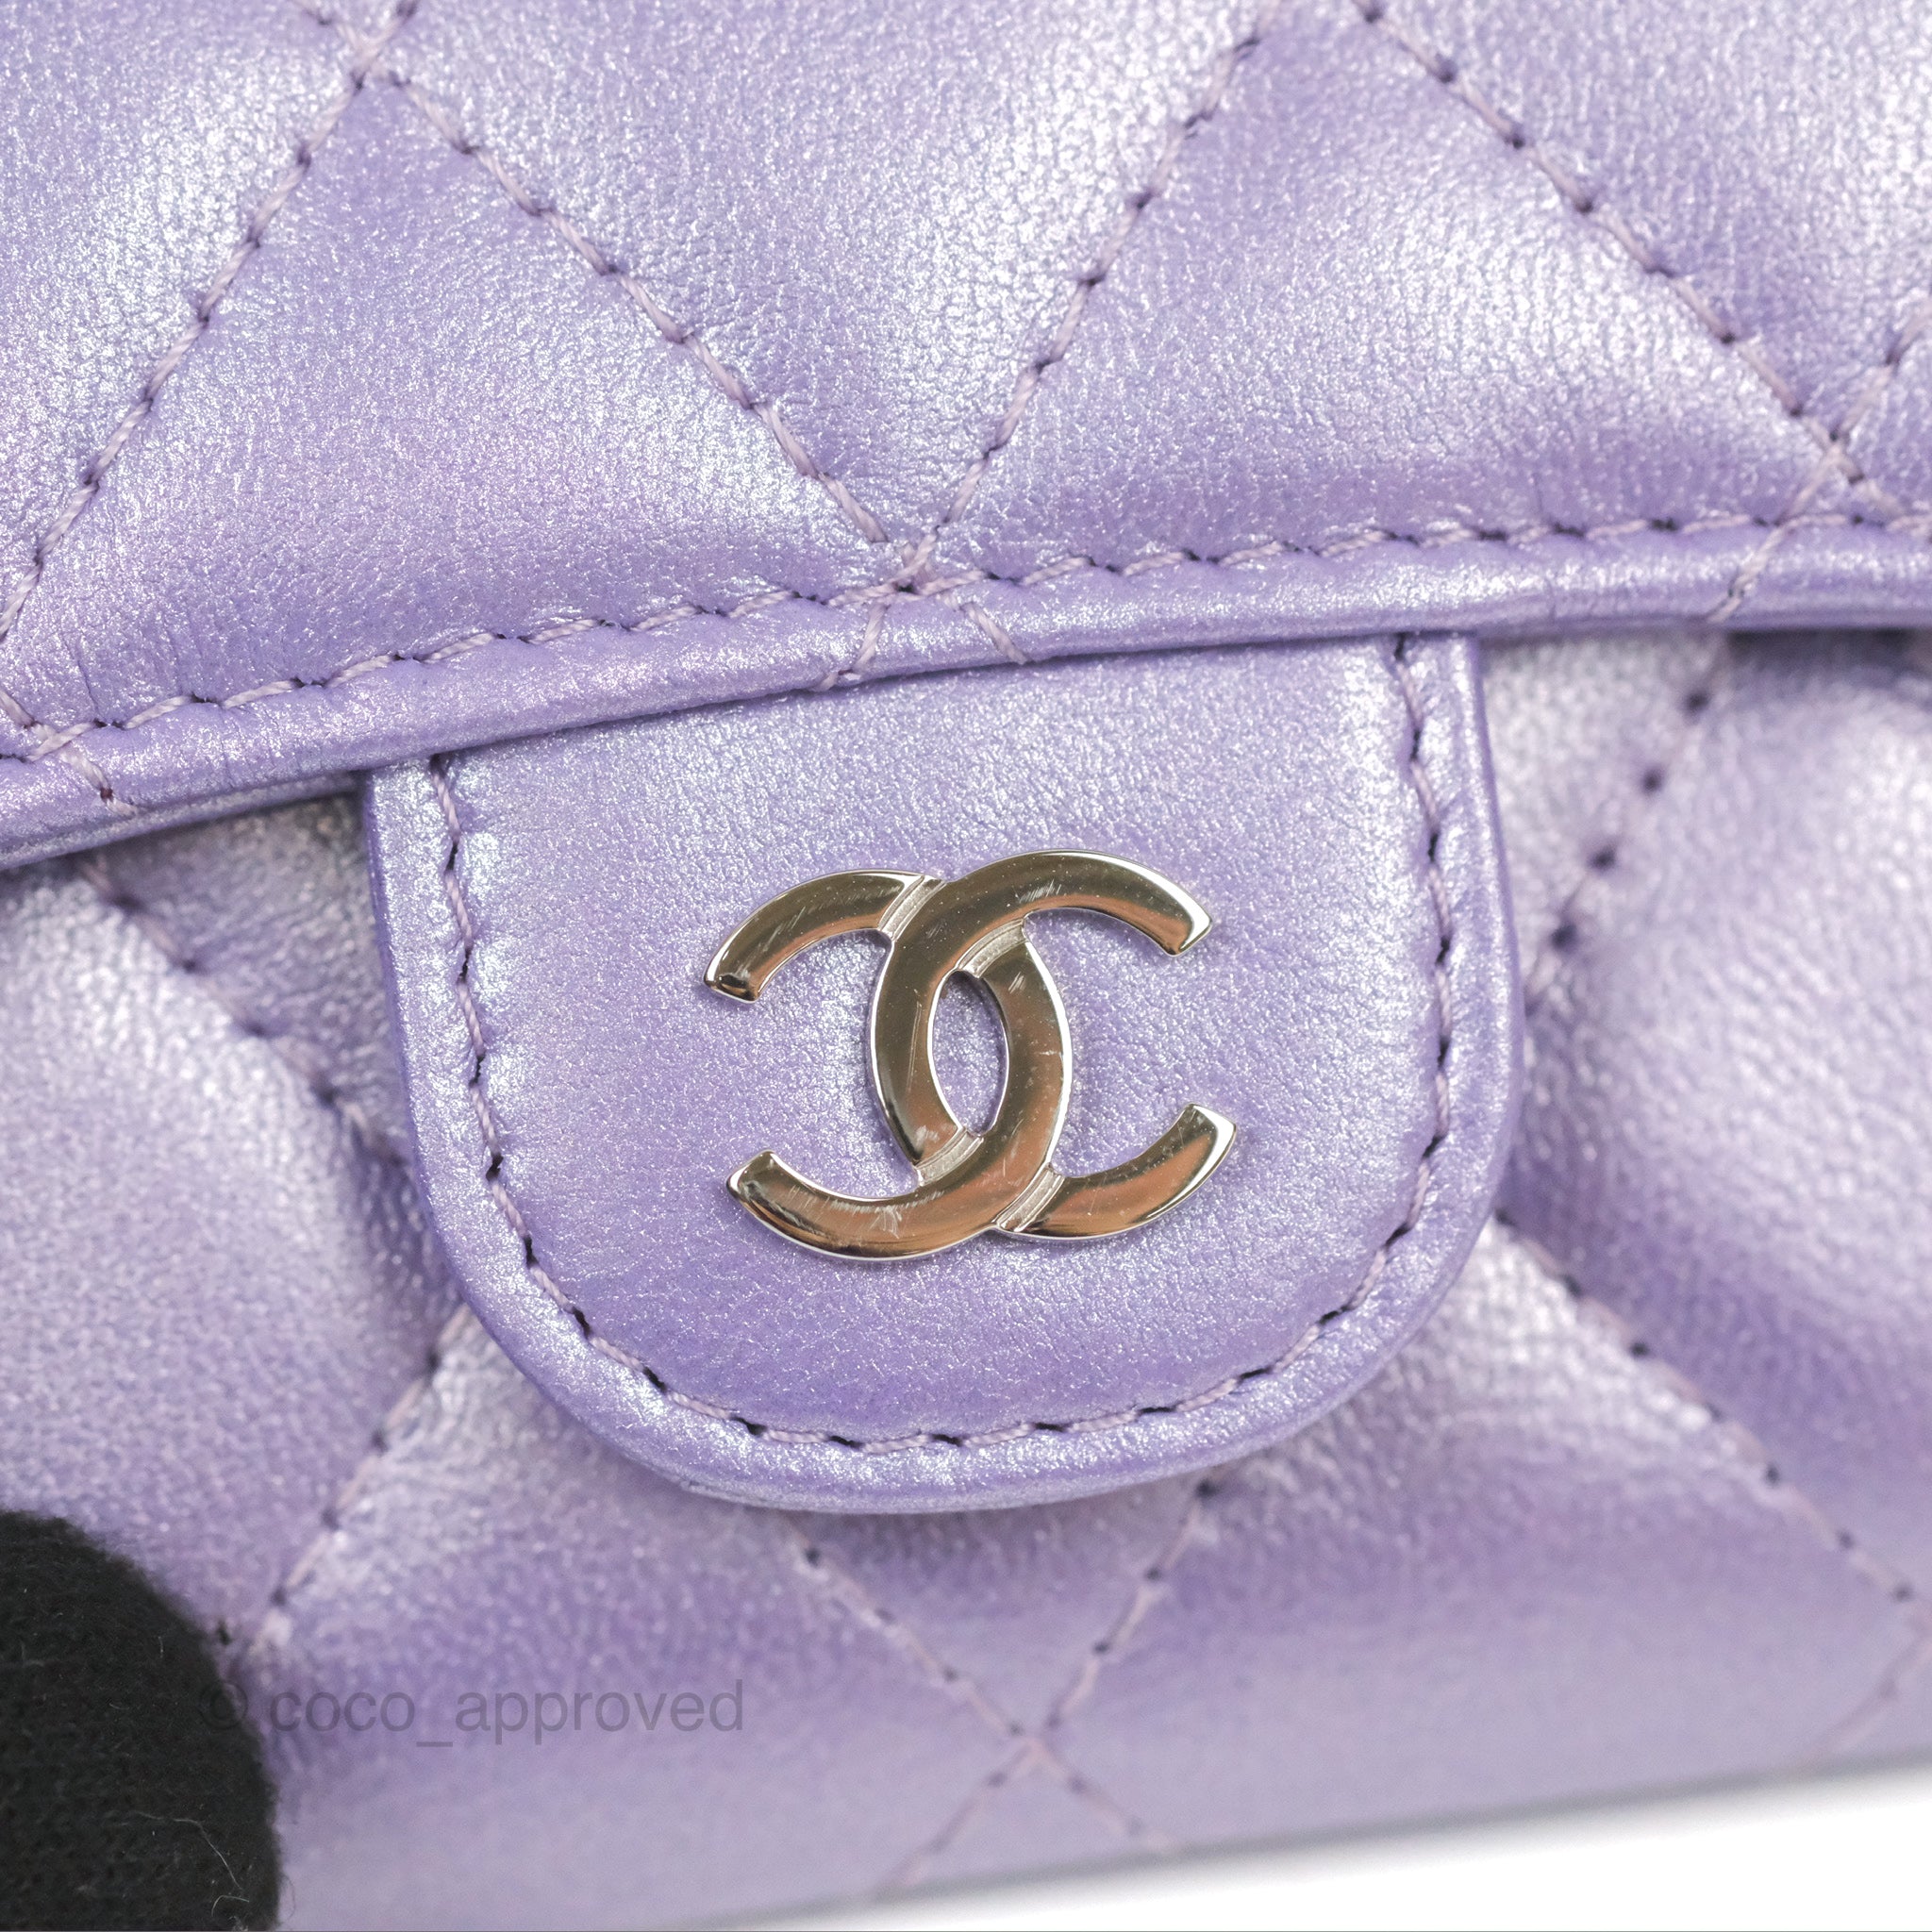 Chanel Classic Flap Card Holder Quilted Iridescent Purple Lambskin Sil –  Coco Approved Studio